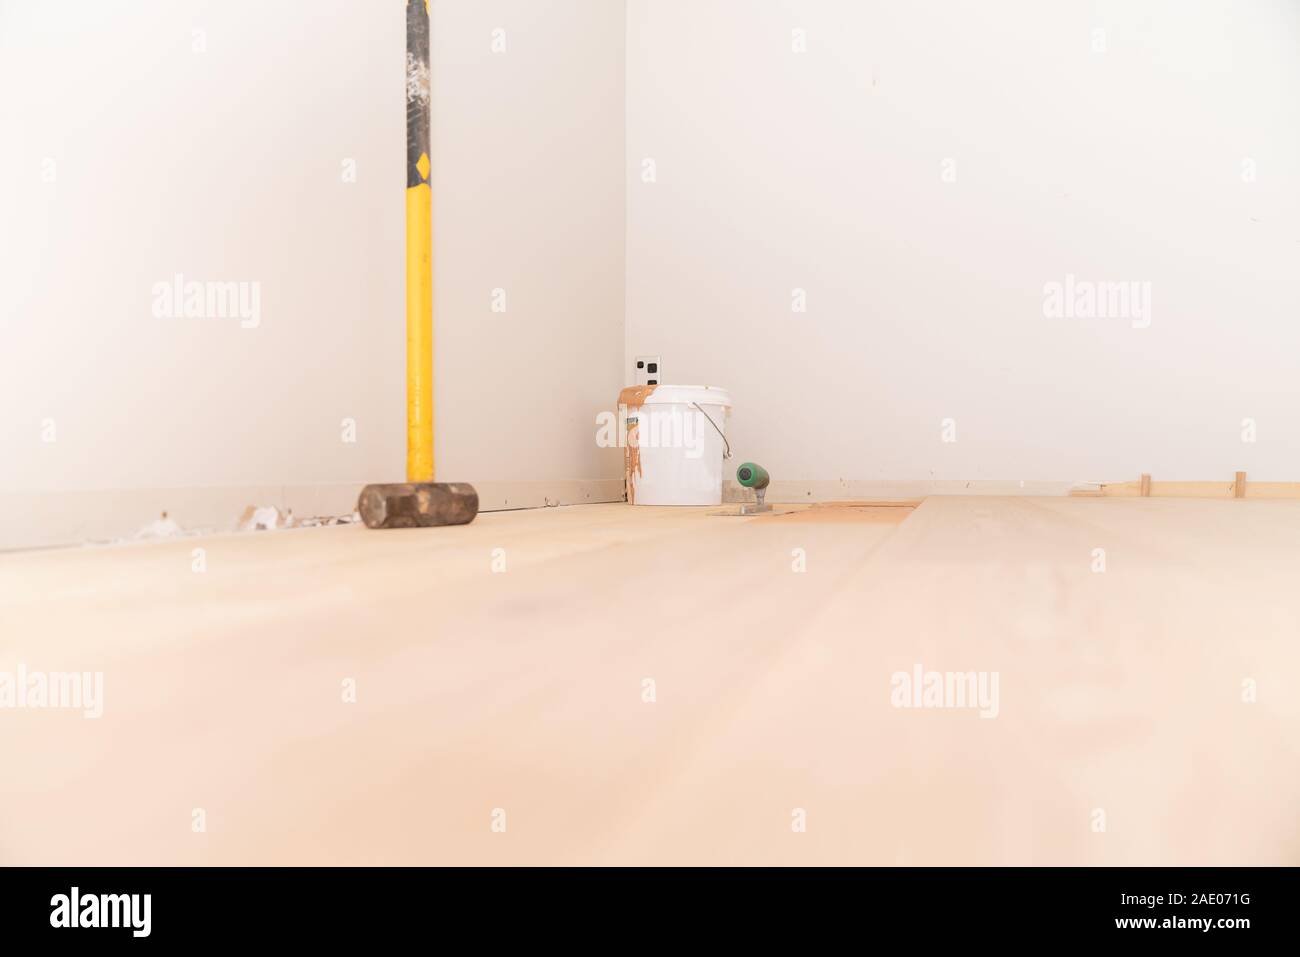 Tauranga New Zealand - November 4 2019; Tools of trade and bucket of adhesive used for laying new wooden floor in home. Stock Photo